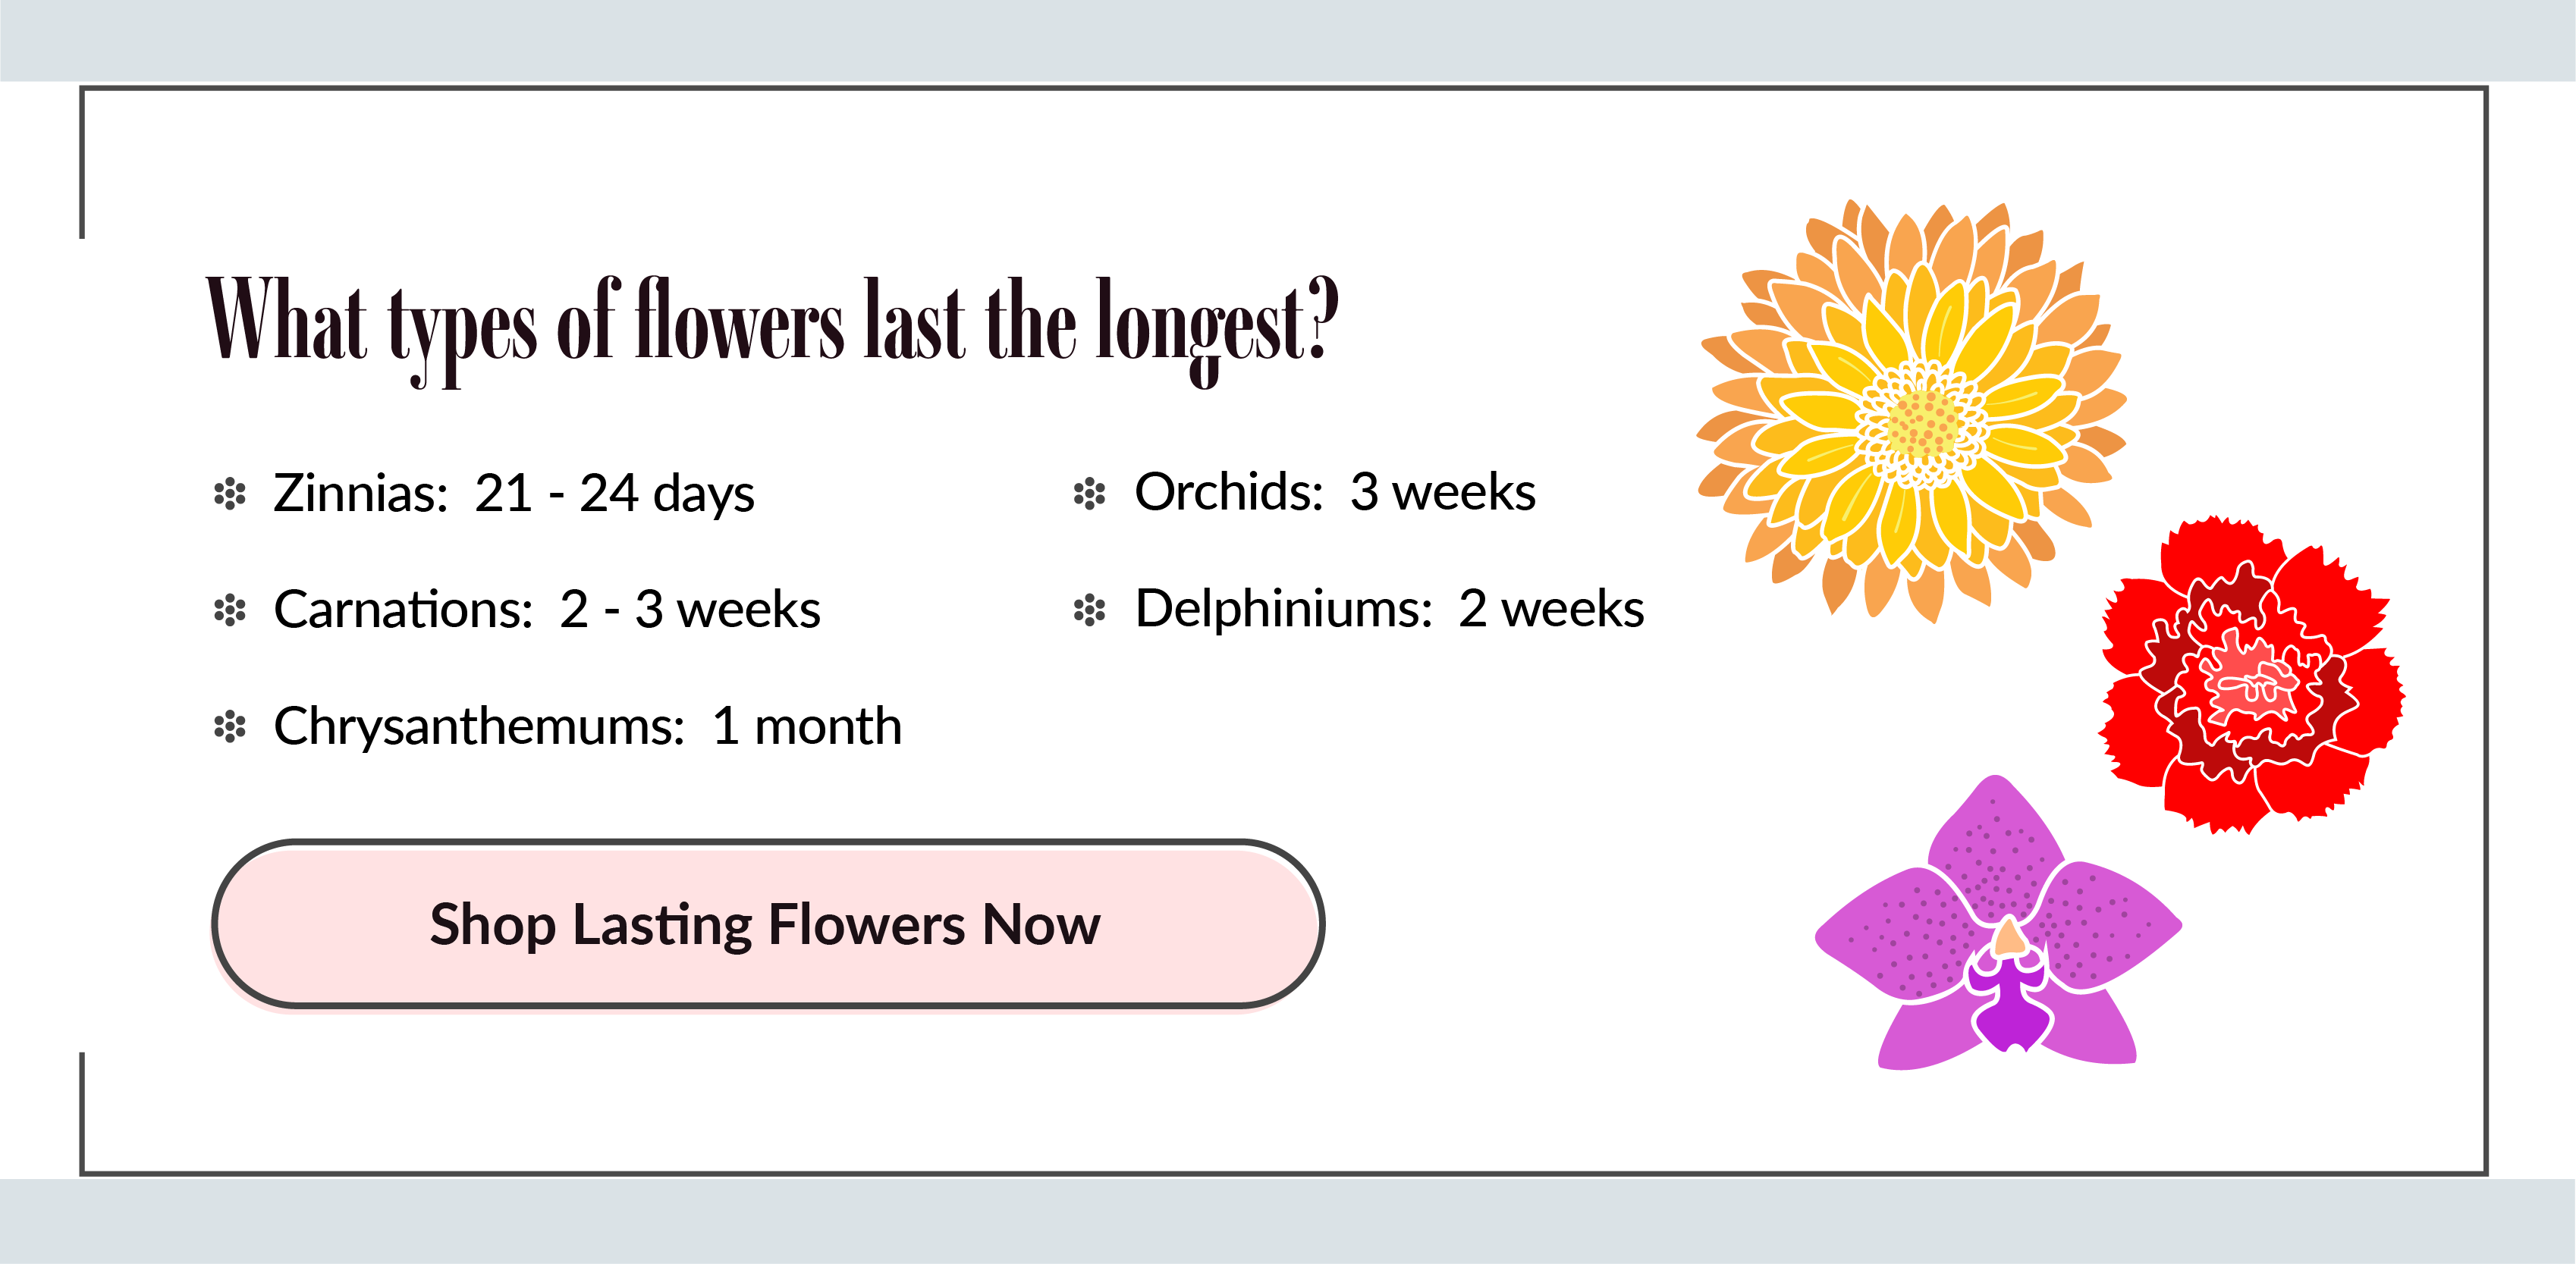 Which flowers last the longest